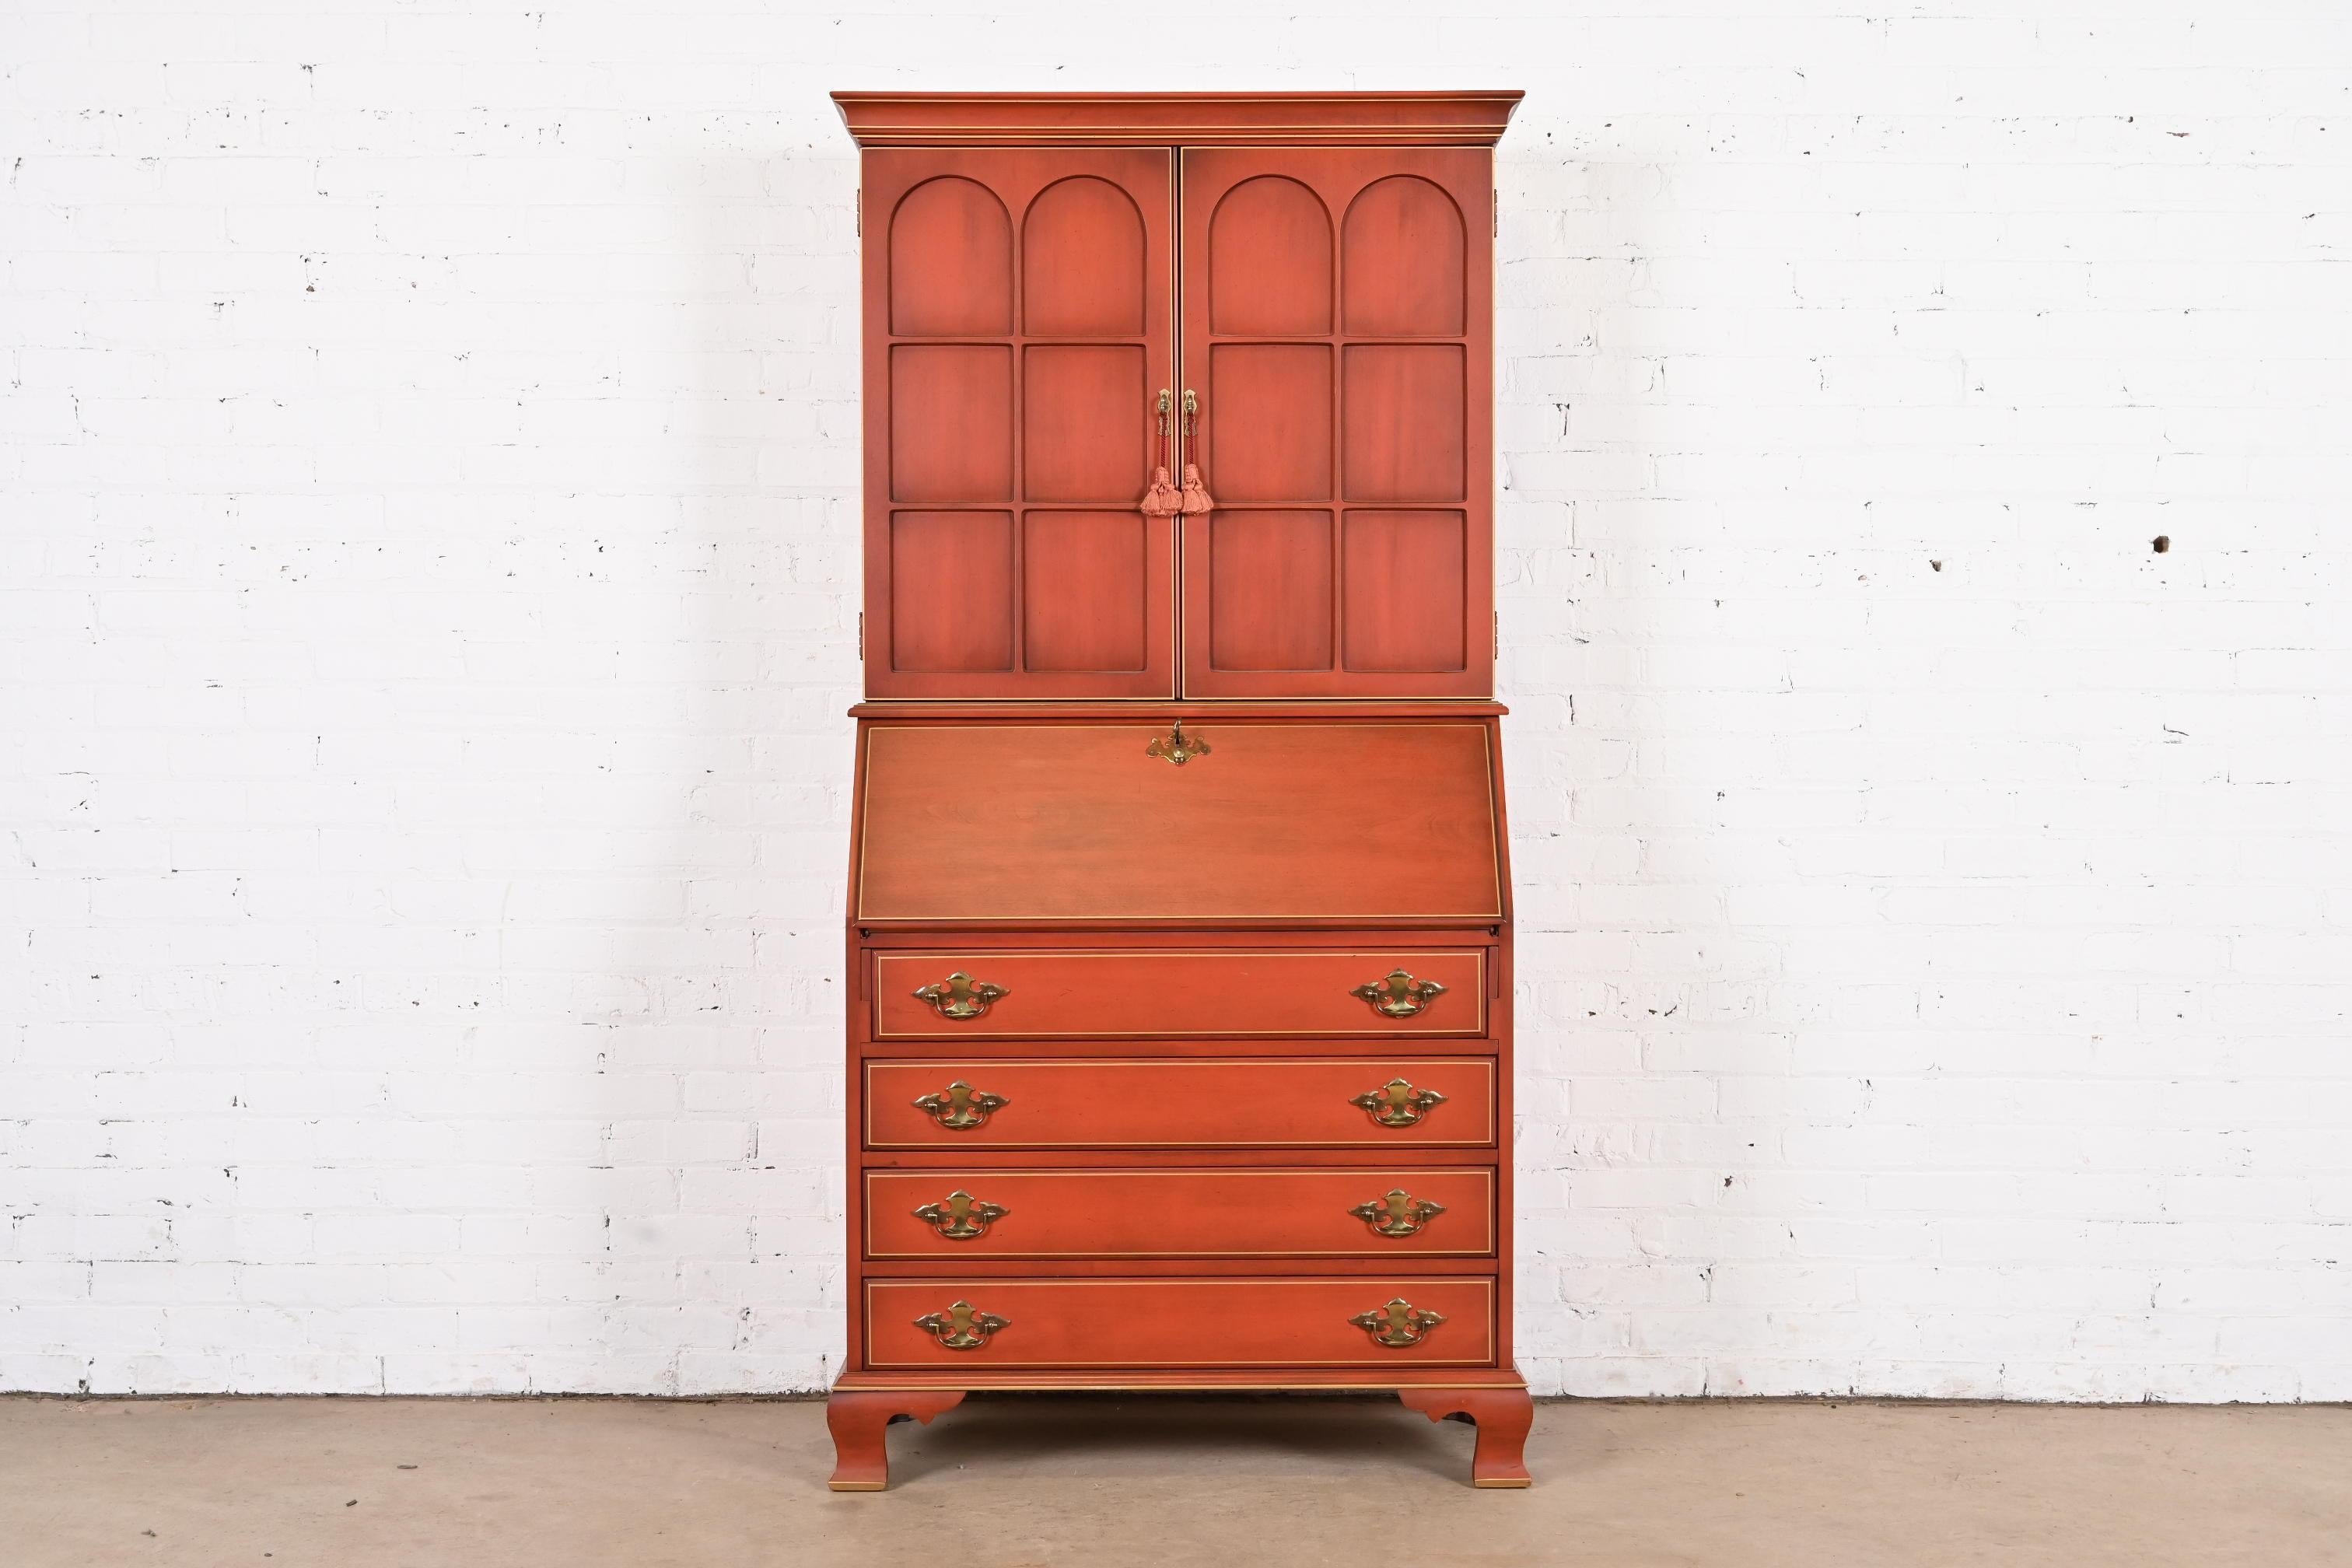 A gorgeous Georgian or Chippendale style bureau with drop front secretary desk and bookcase hutch top

By Jasper Cabinet Co.

USA, Circa 1970s

Carved red lacquered cherry wood, with gold gilt trim, and original brass hardware. Desk locks, and